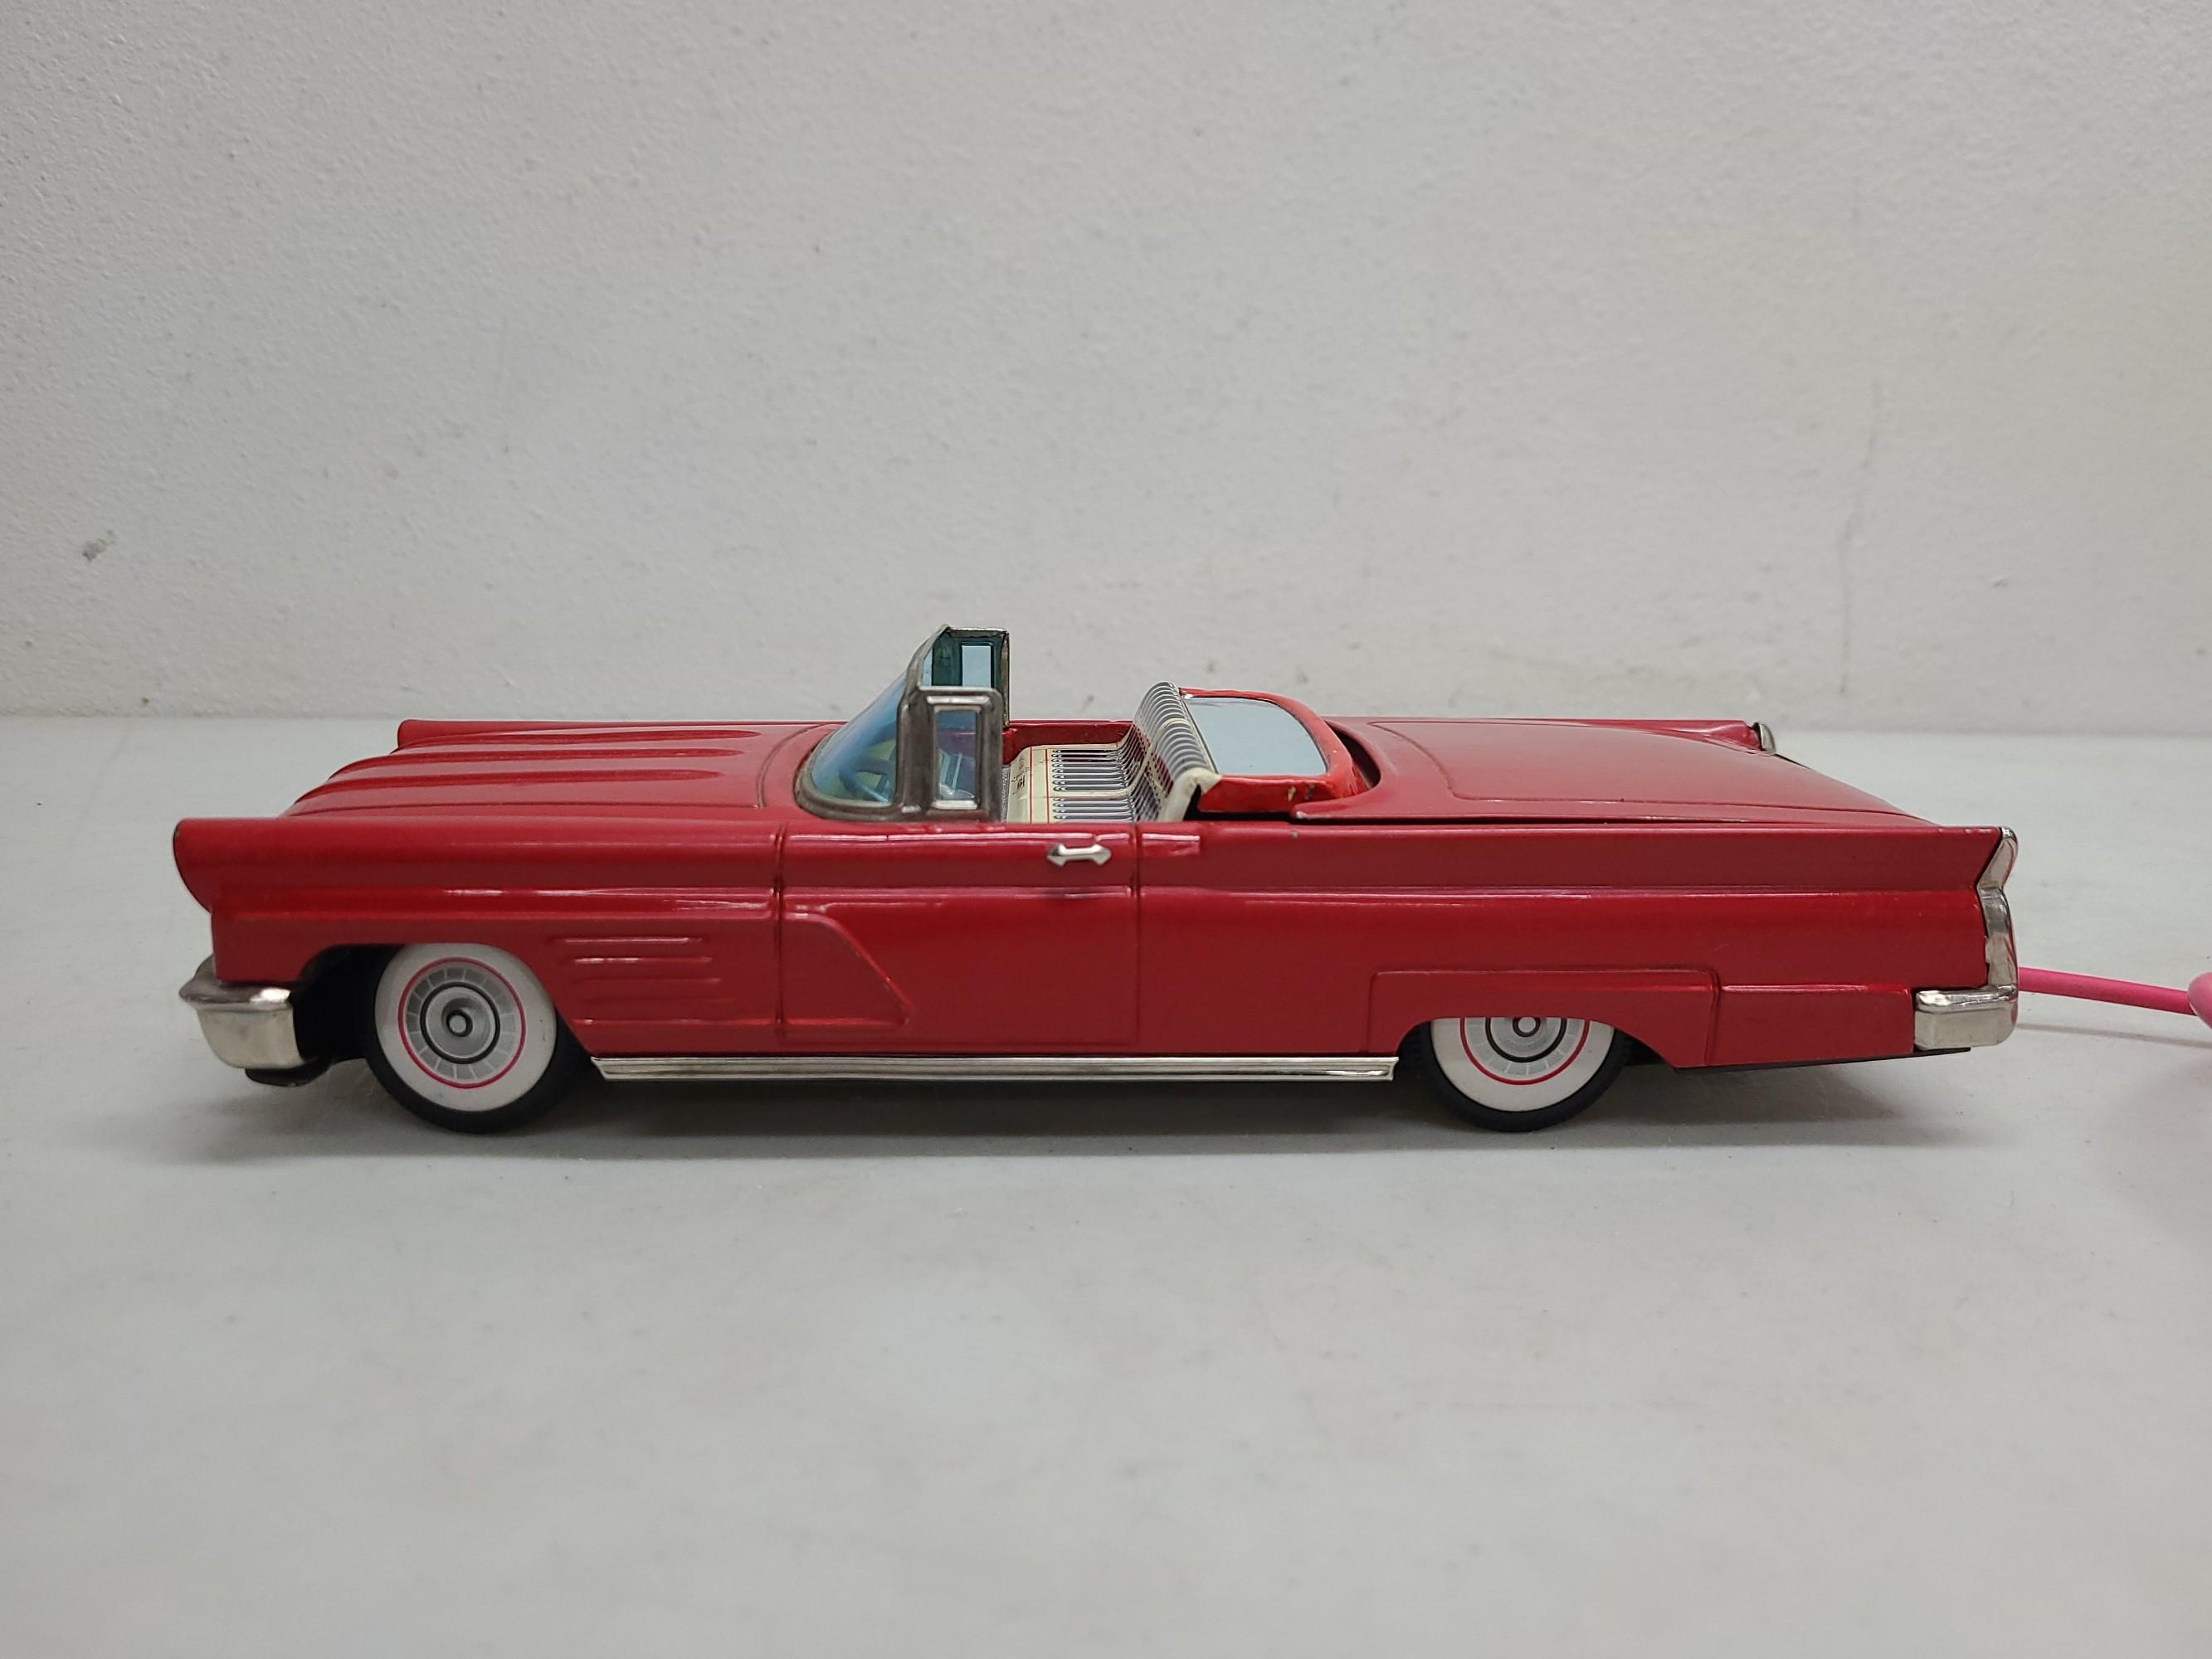 1959 Cragstan Lincoln Convertible Battery Op Tin Toy